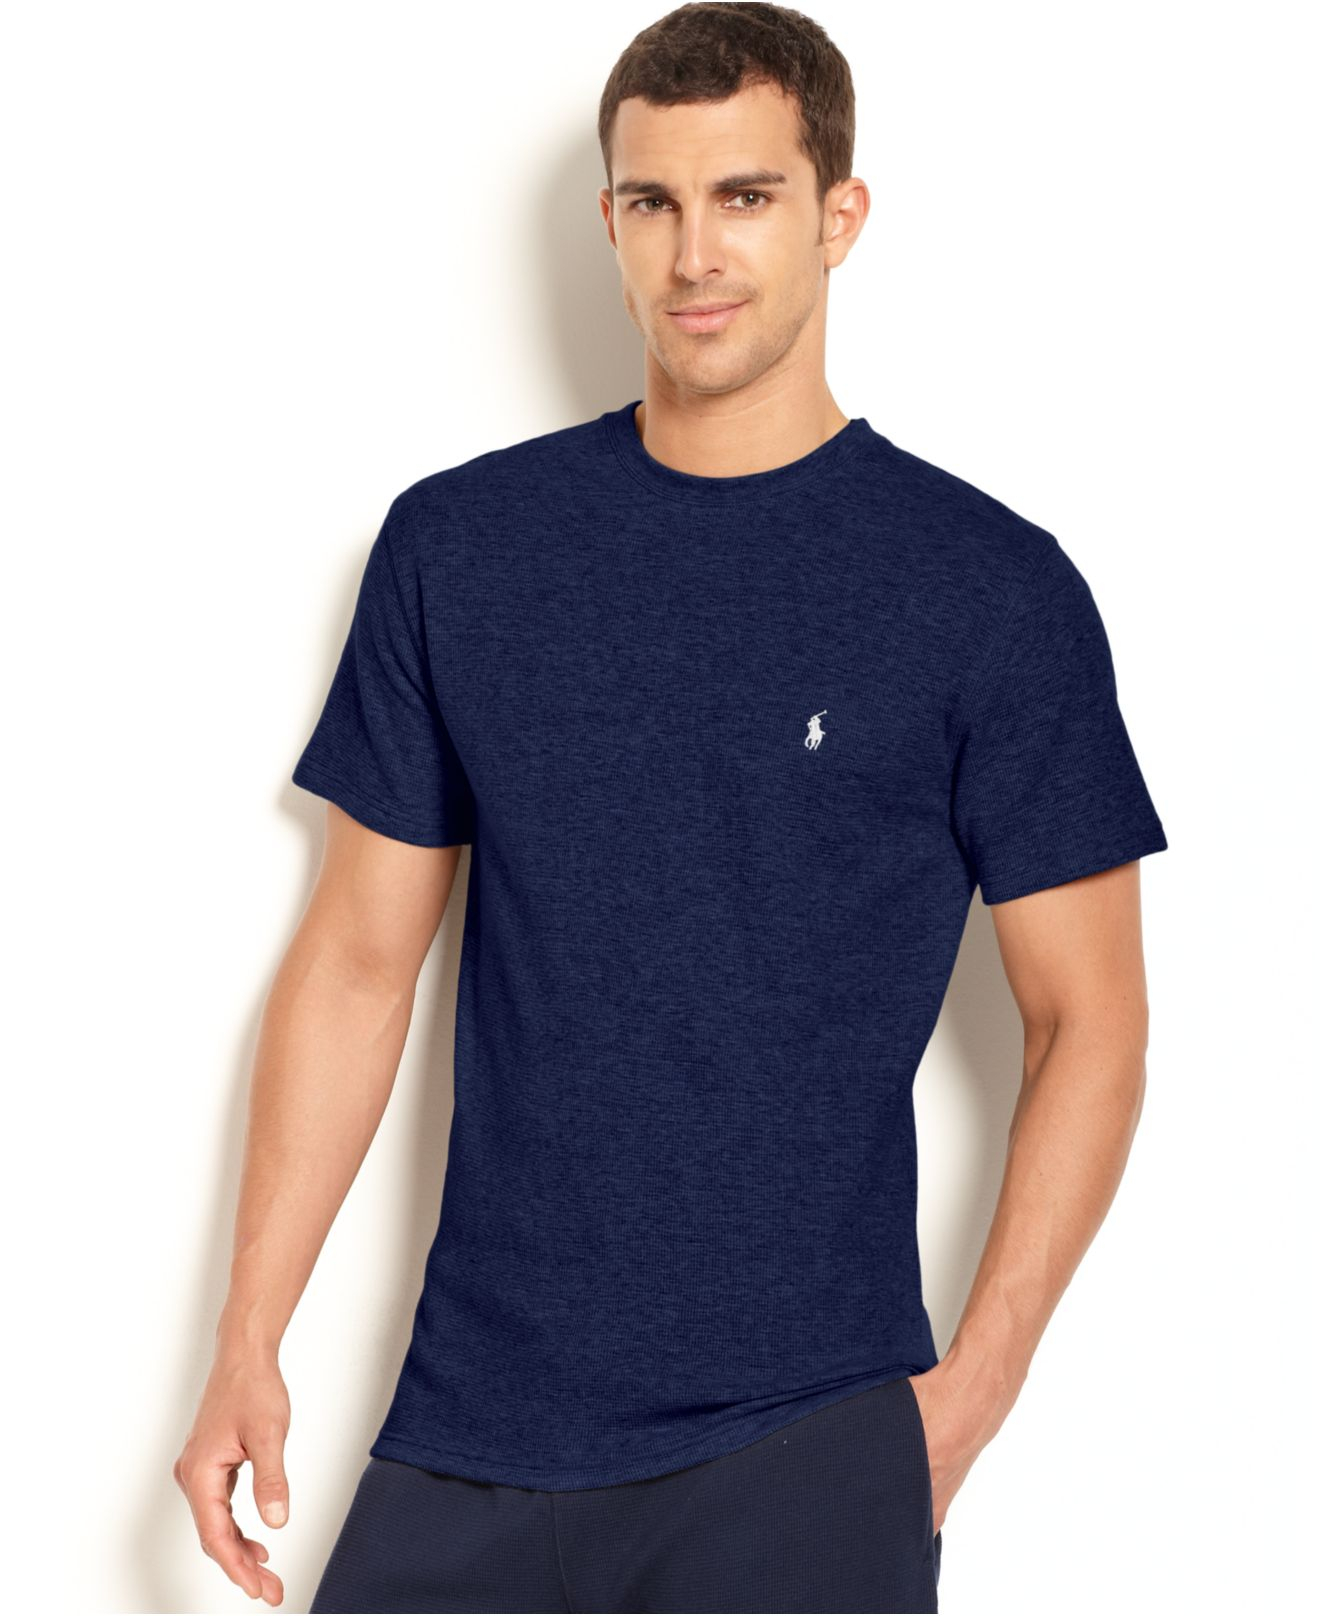 Lyst - Polo Ralph Lauren Waffle-knit Thermal Crew-neck T-shirt in Blue ...